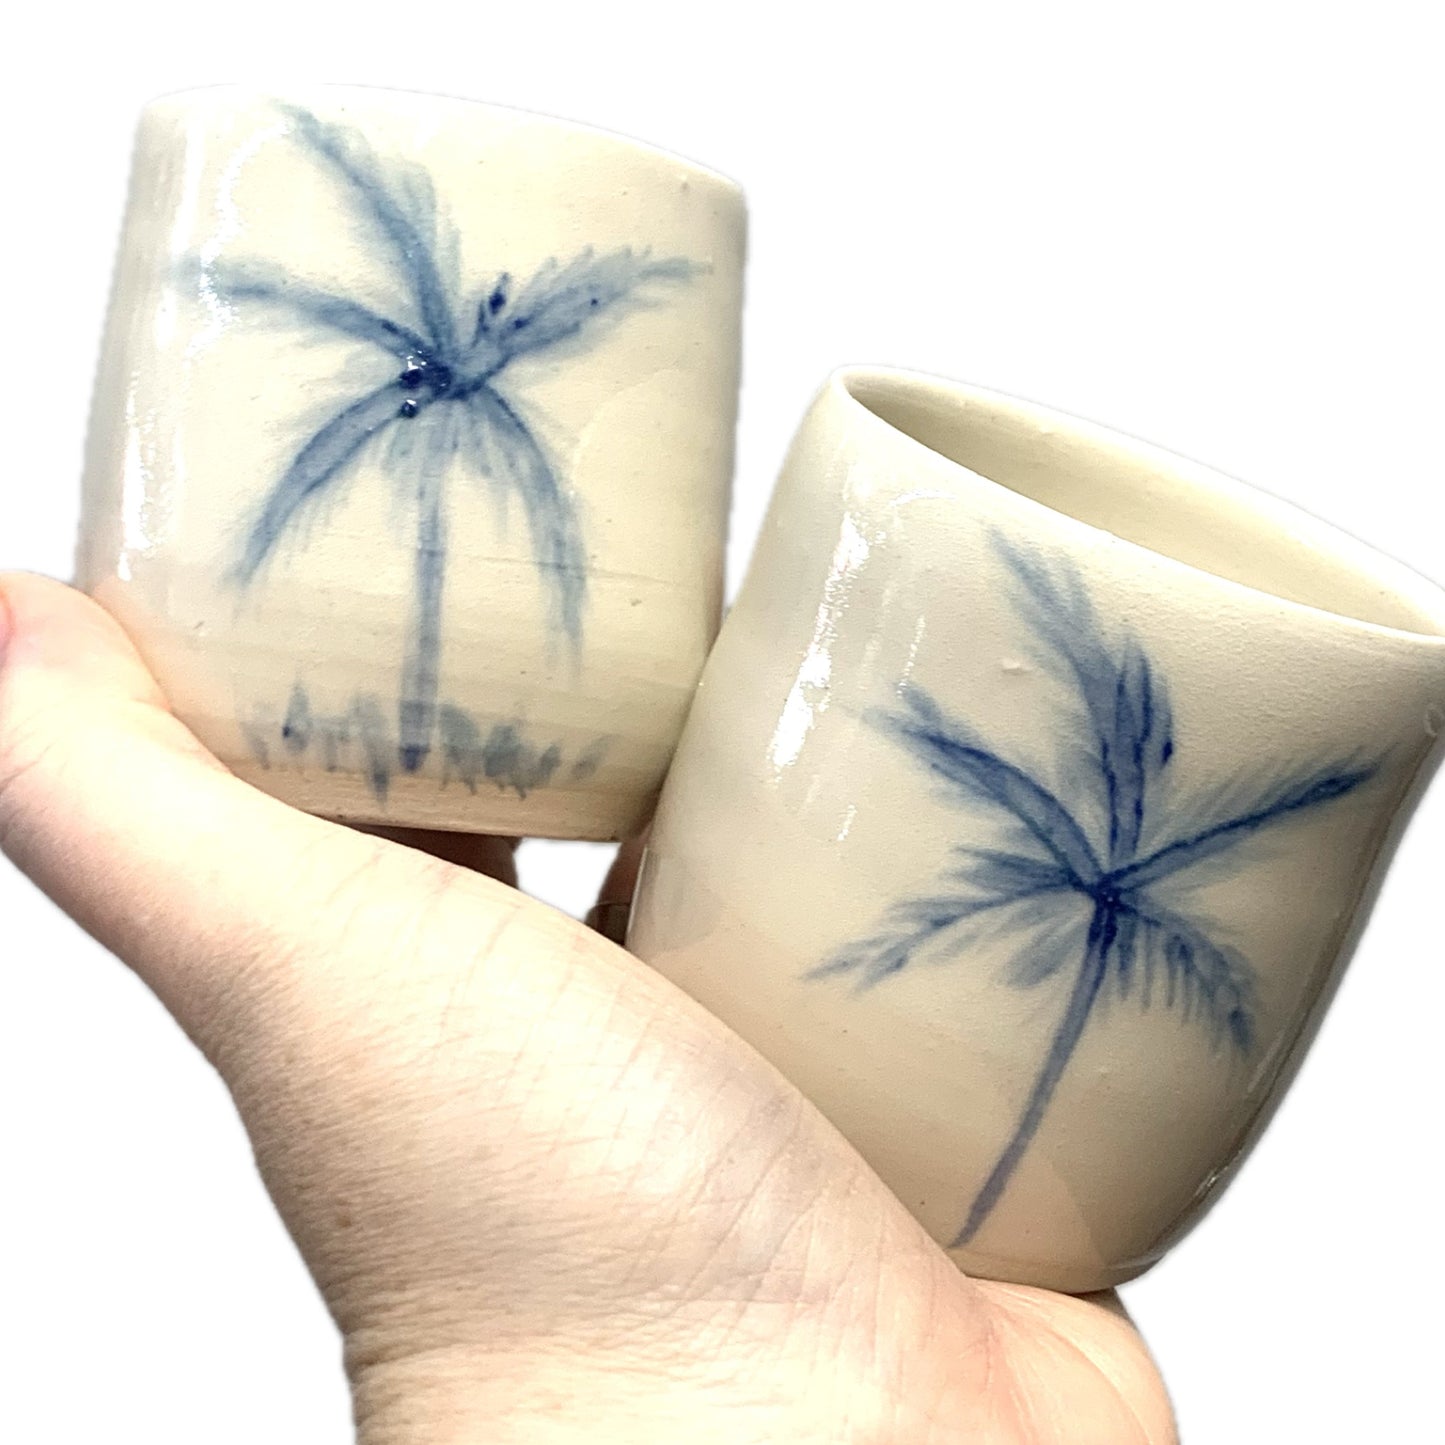 EARTH BY HAND- Espresso/Piccolo Cups- White Clay with Blue Palm Trees